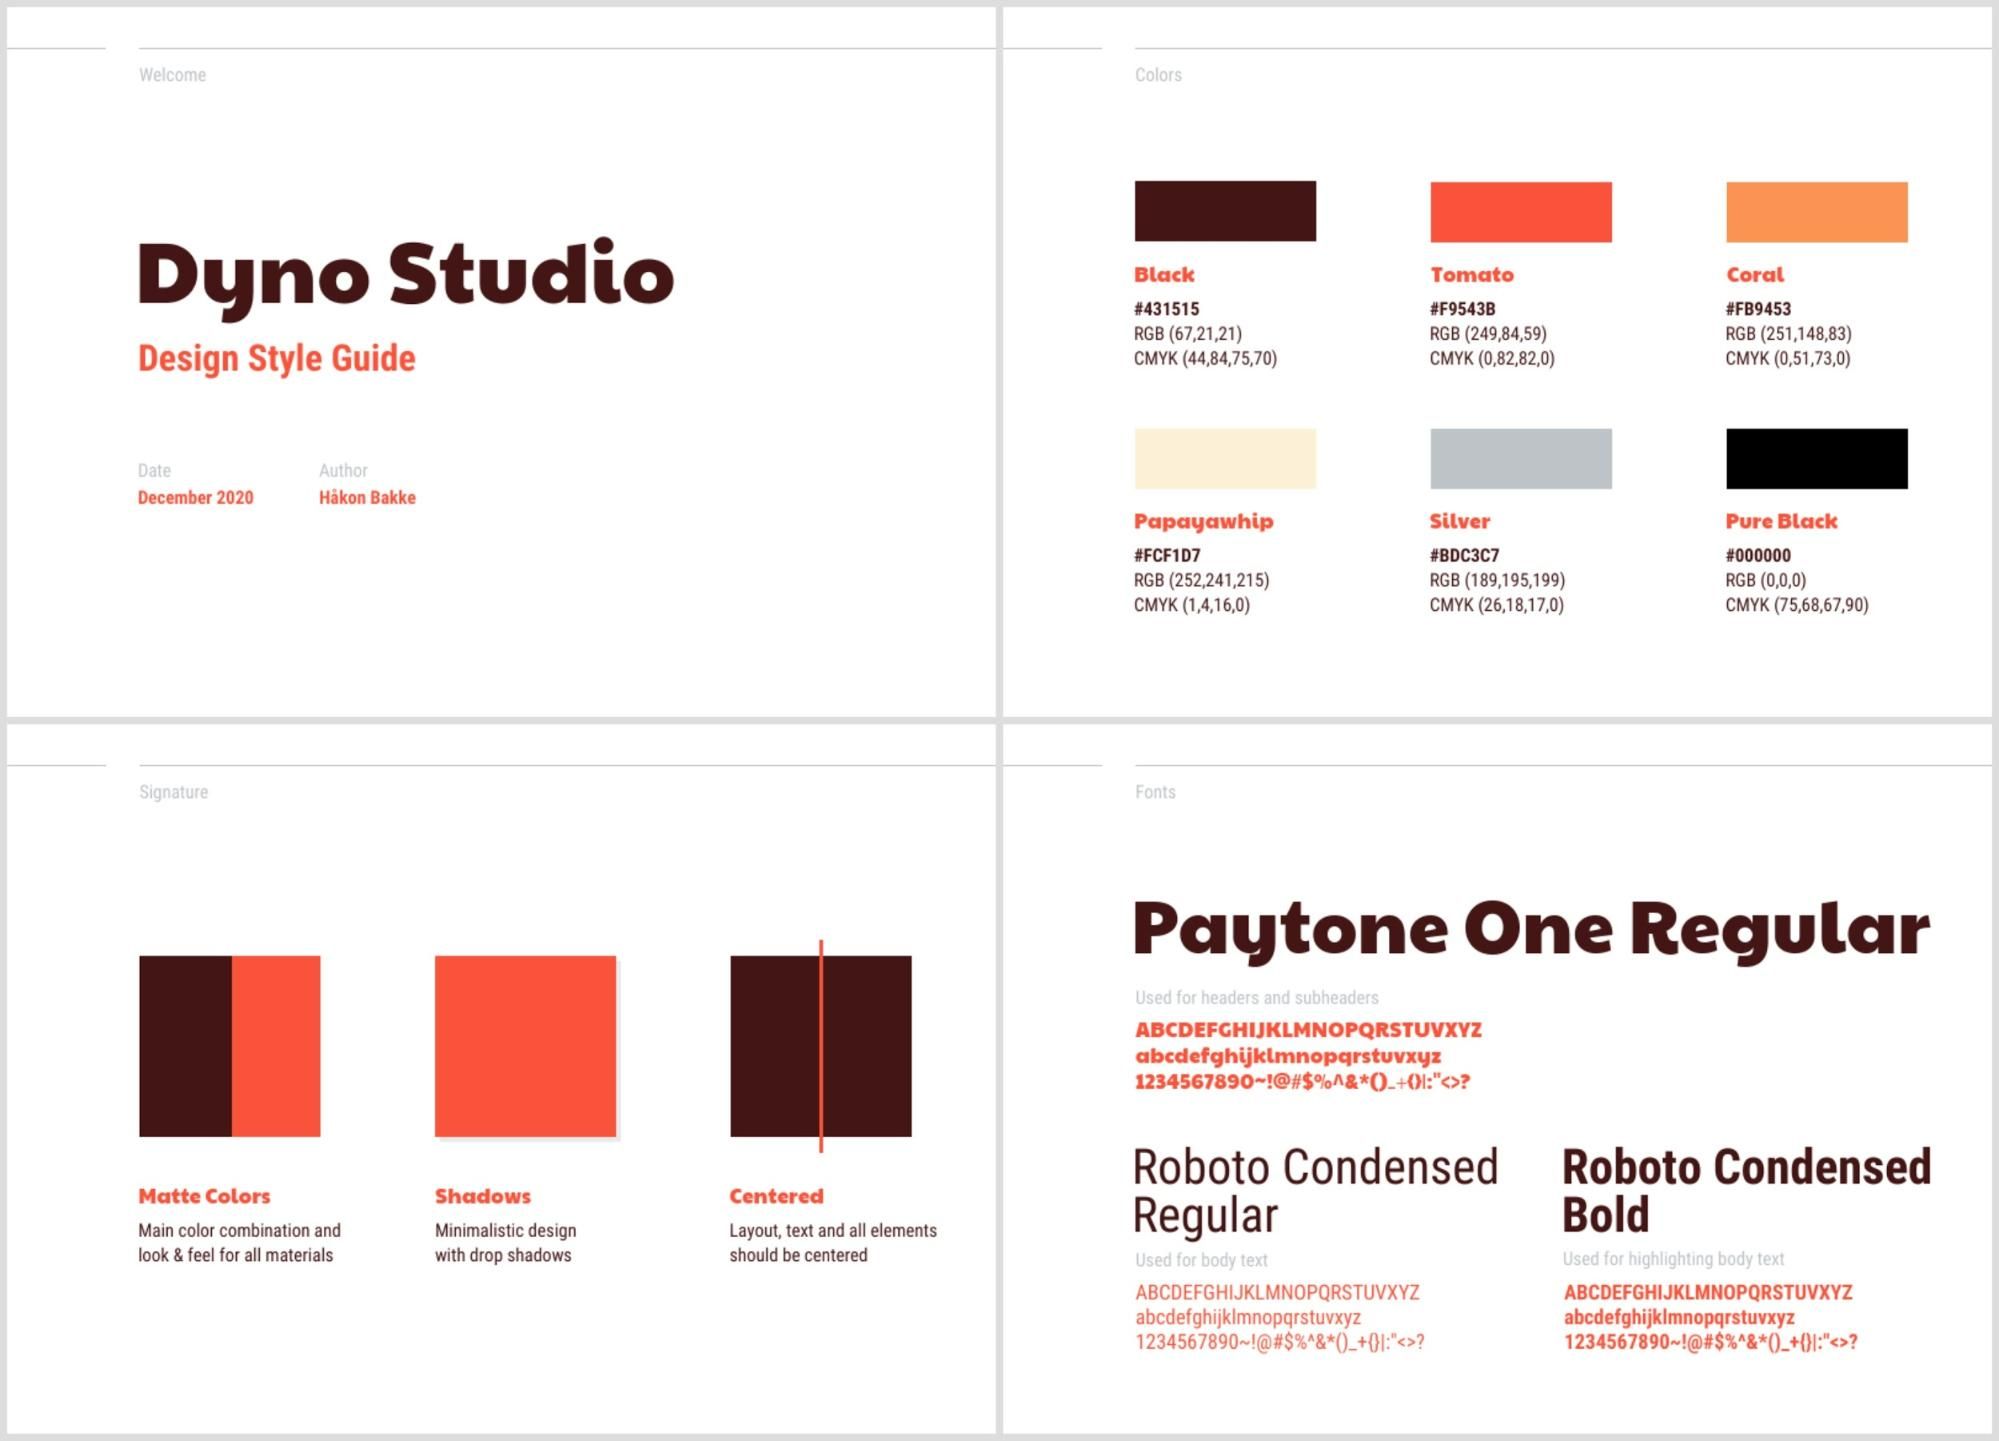 Brand Style Guide Creation: Consistency Across Platforms